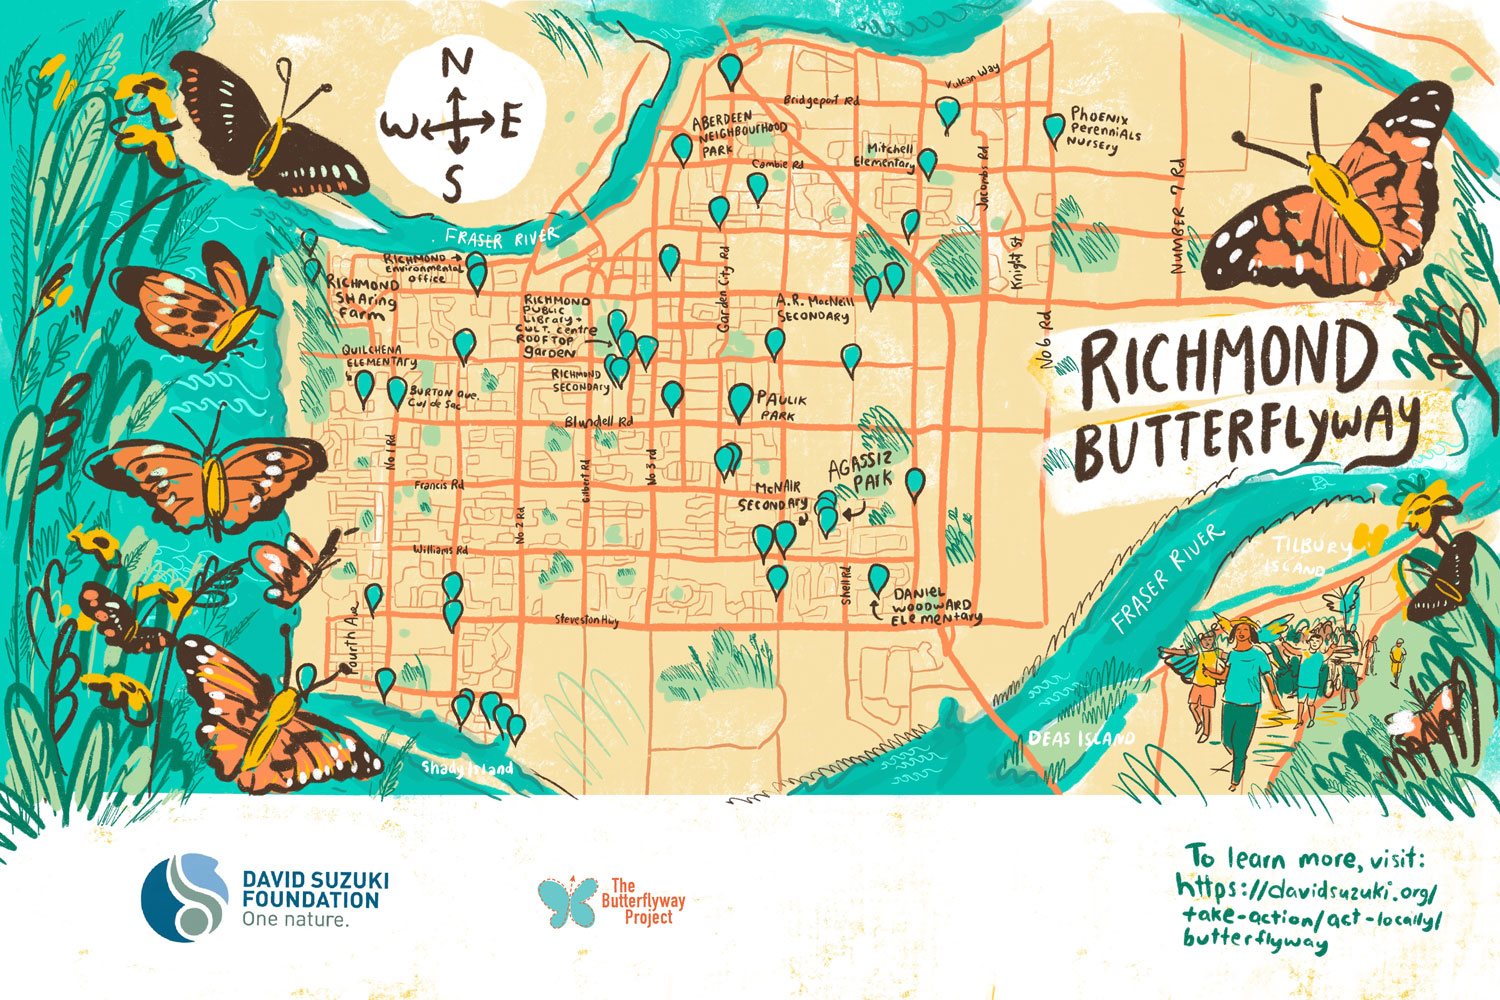 Illustrated map of Butterflyway locations in Richmond